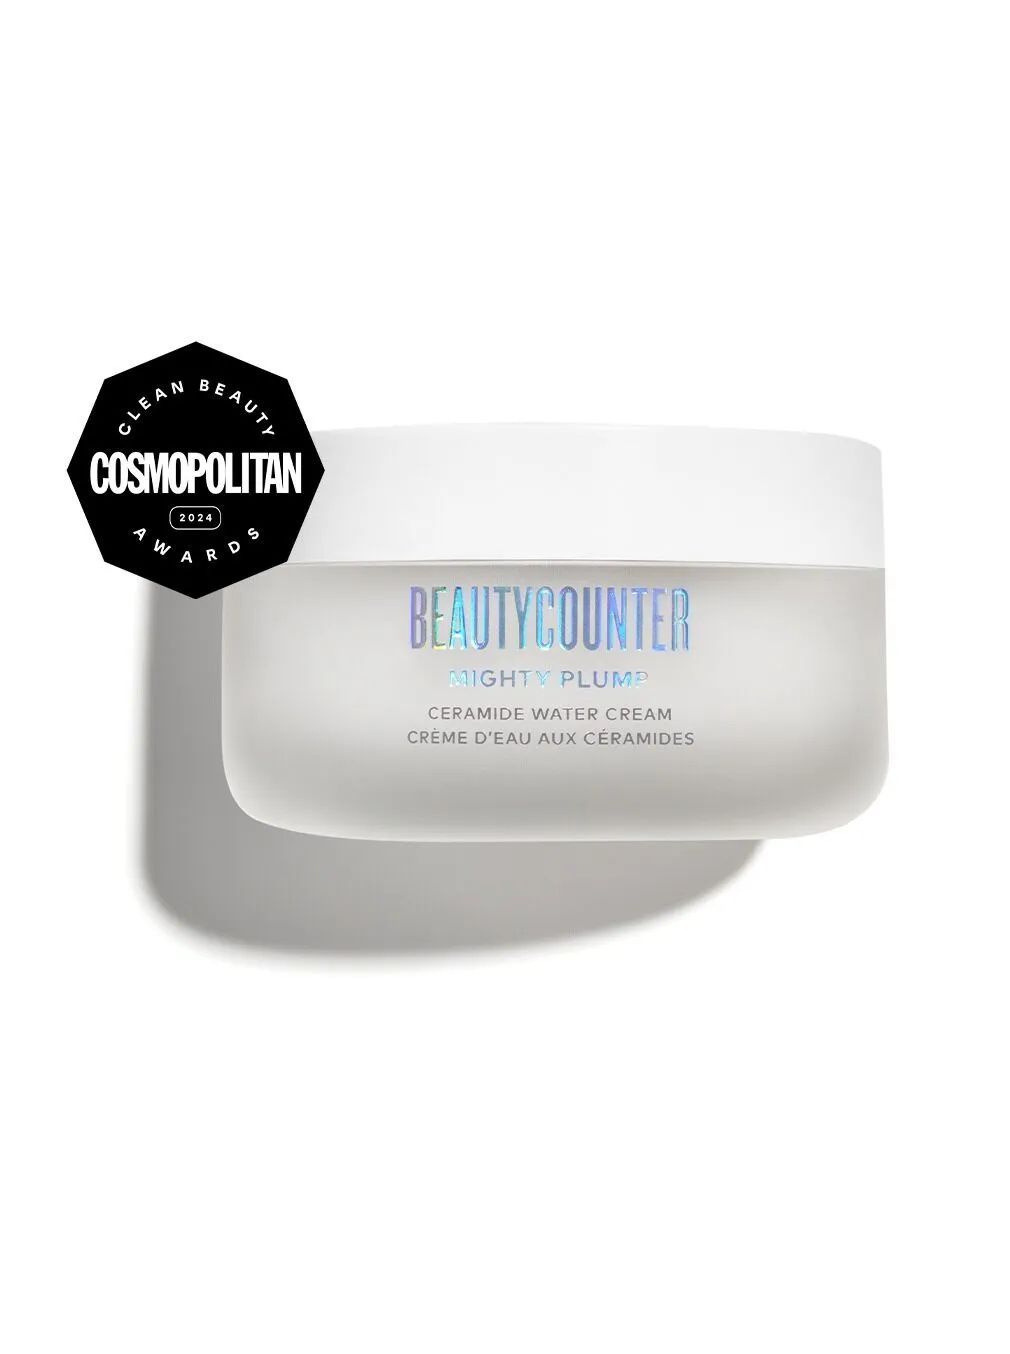 Mighty Plump Ceramide Water Cream - Beautycounter - Skin Care, Makeup, Bath and Body and more! | Beautycounter.com